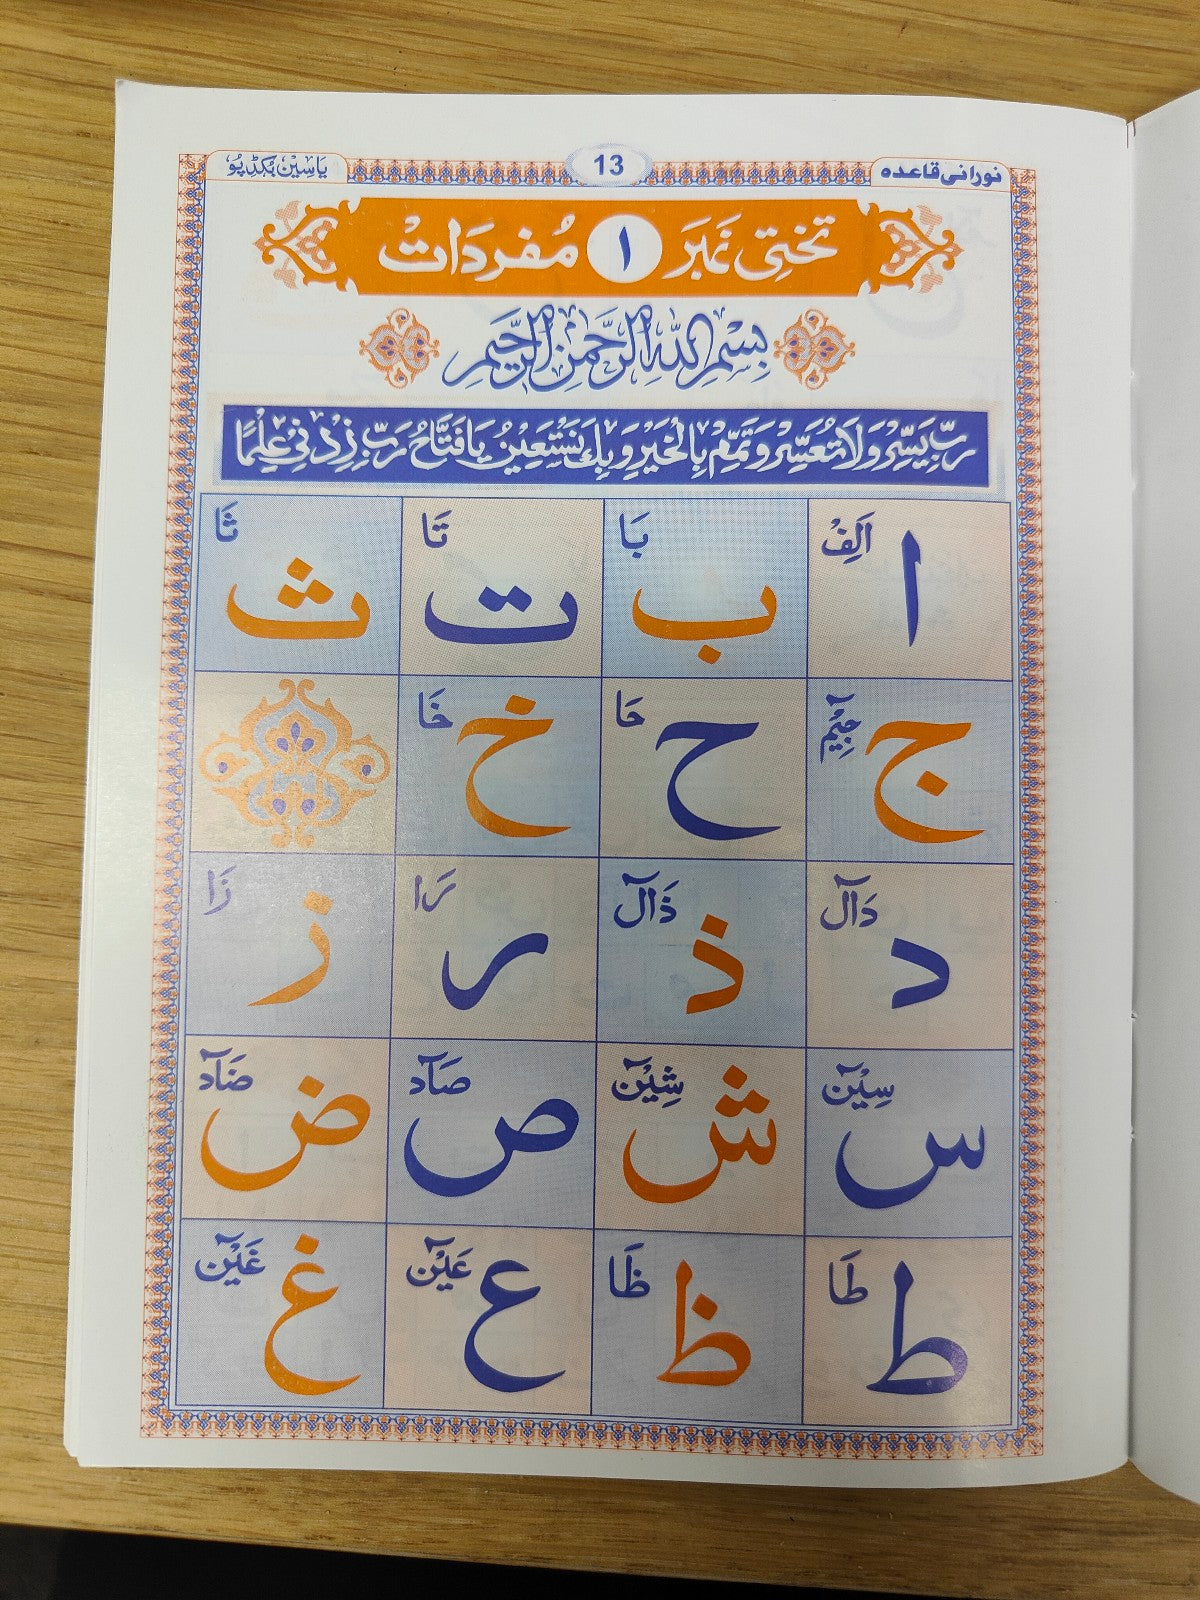 Start your Quranic journey with the Noorani Qaida book offered by Hikmah Boutique. Perfect for beginners, this essential learning tool will guide you through Arabic script and pronunciation, laying the foundation for reading the Quran. Explore now!